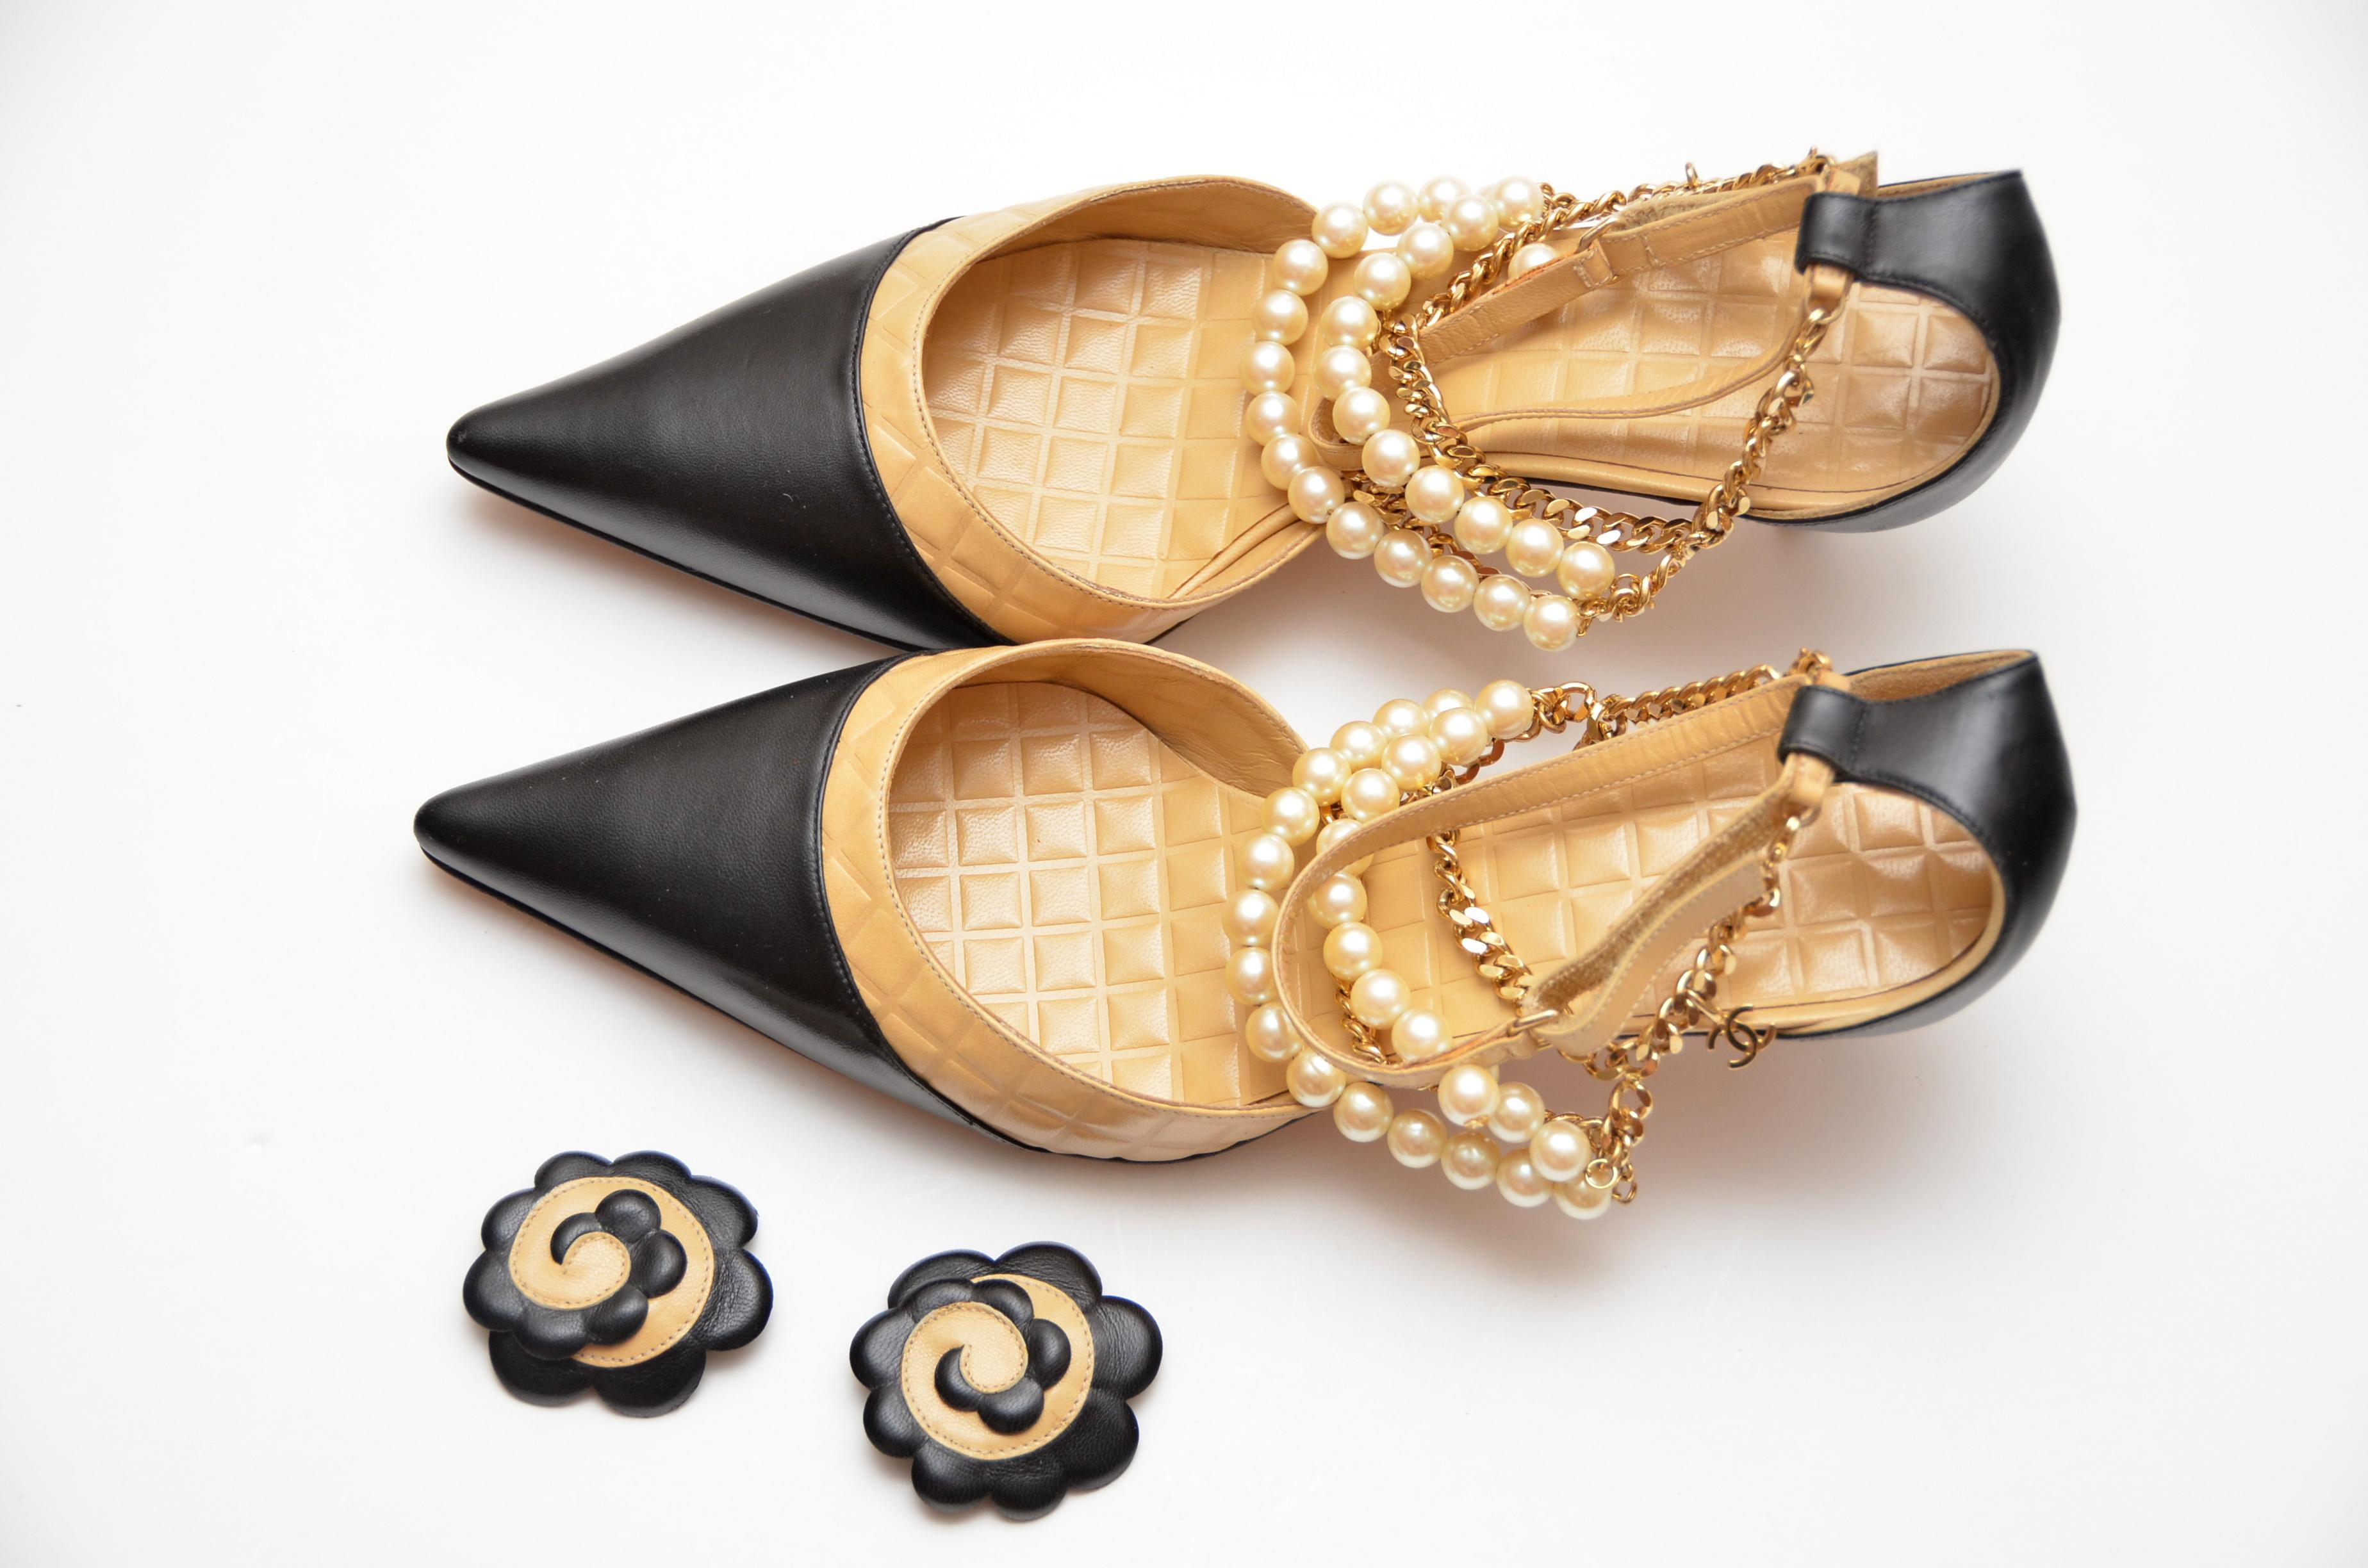 chanel shoes with pearls